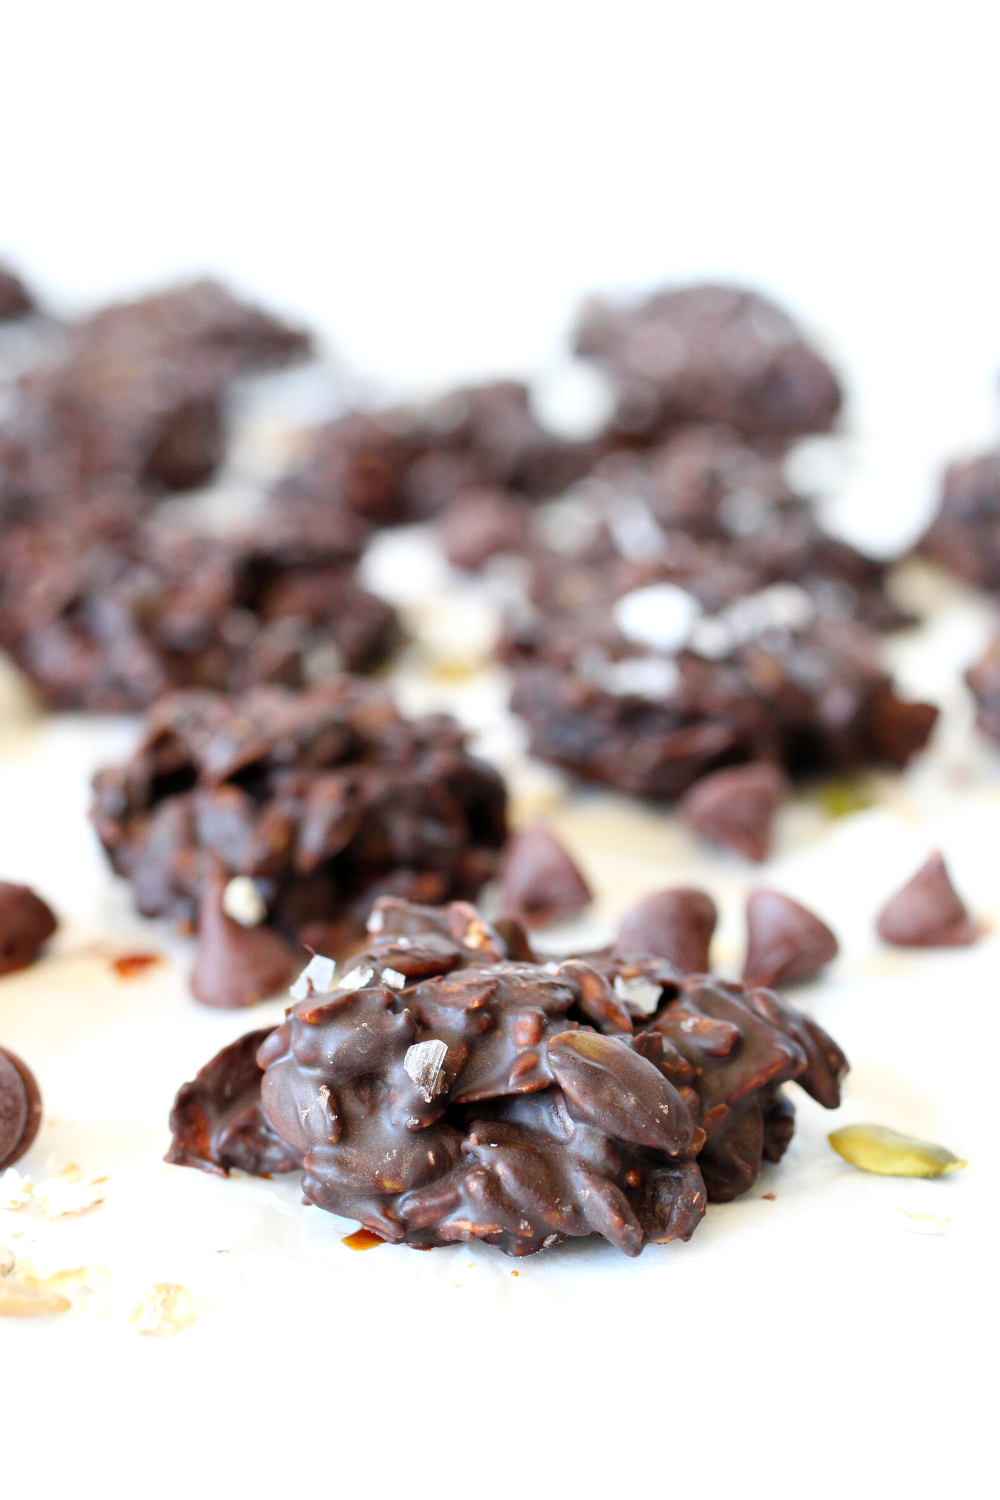 perfectly covered chocolate seeds and coconut make for a delicious and nutritious keto snack